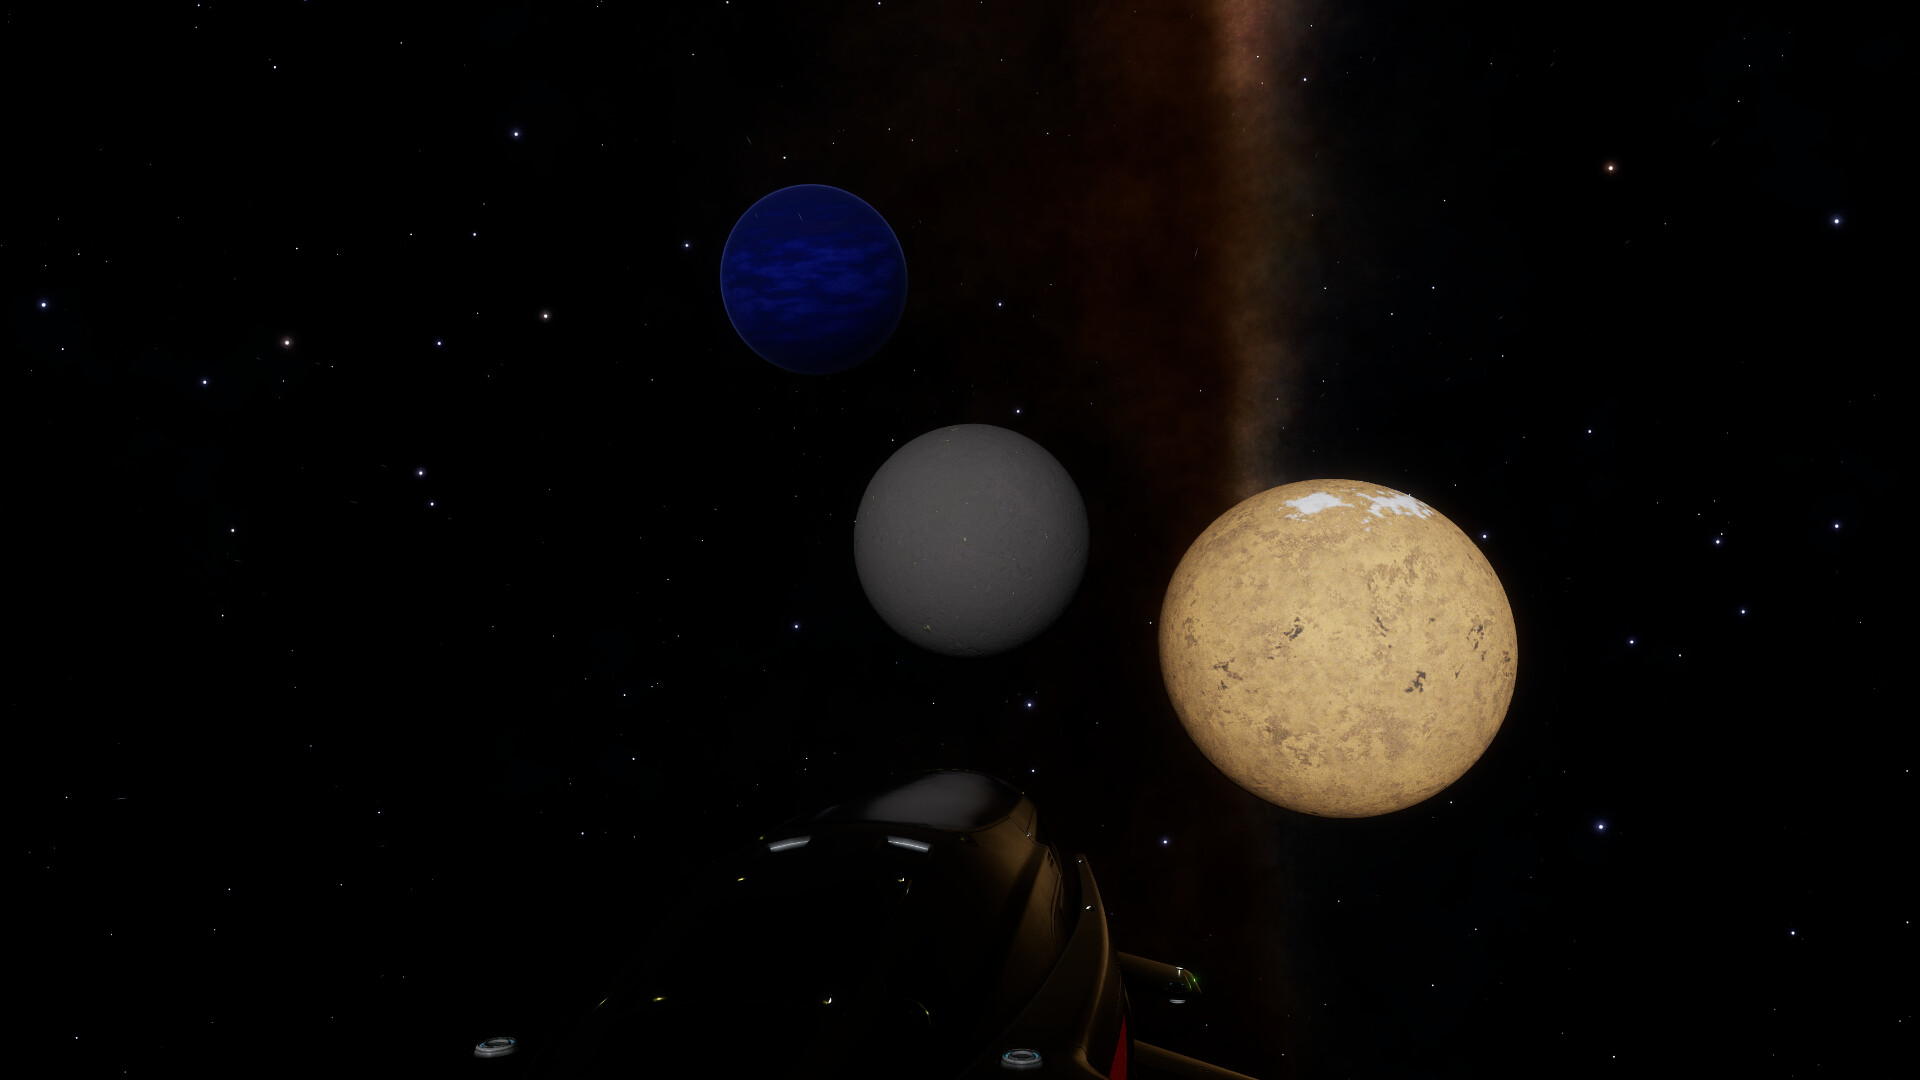 Close and fast orbiting pair of moons